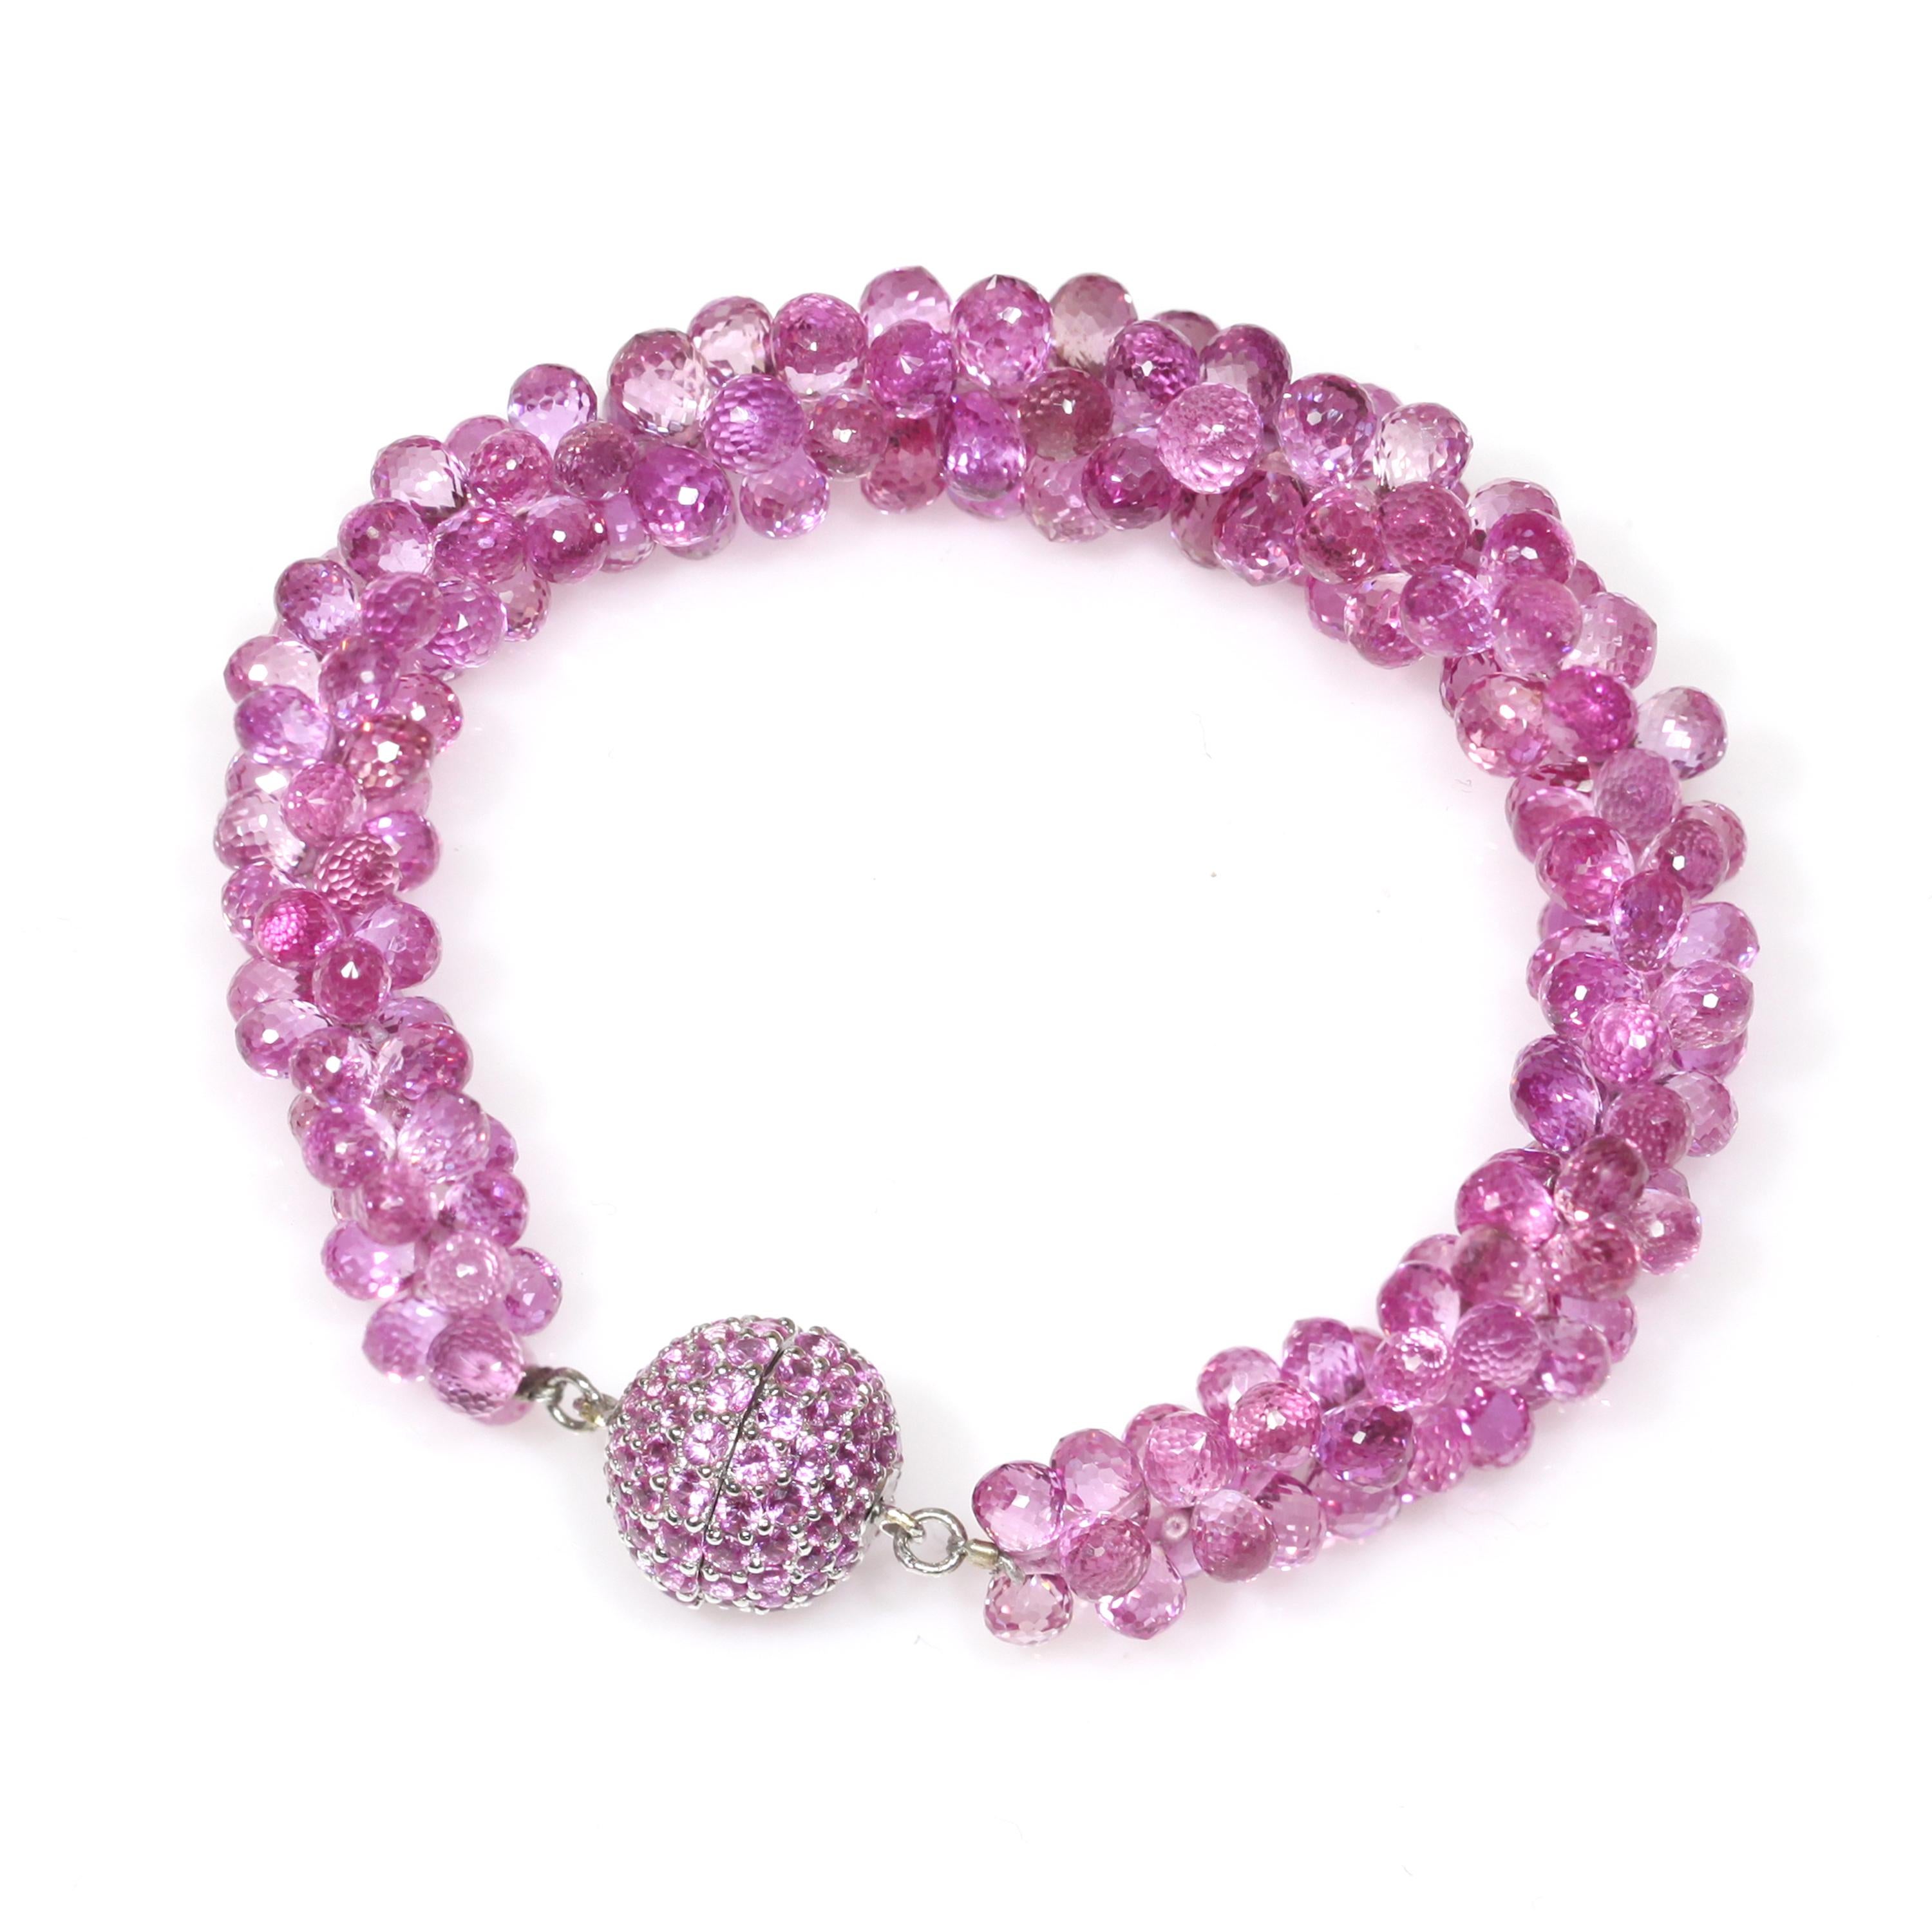 Crafted from 18k white gold, this beautiful bracelet features a long row of Pink Sapphire briolettes in proper unison, giving it the look of a vine, is secured with a bolo clasp and Pink Sapphire ball ends, and together forms a captivating jewelry